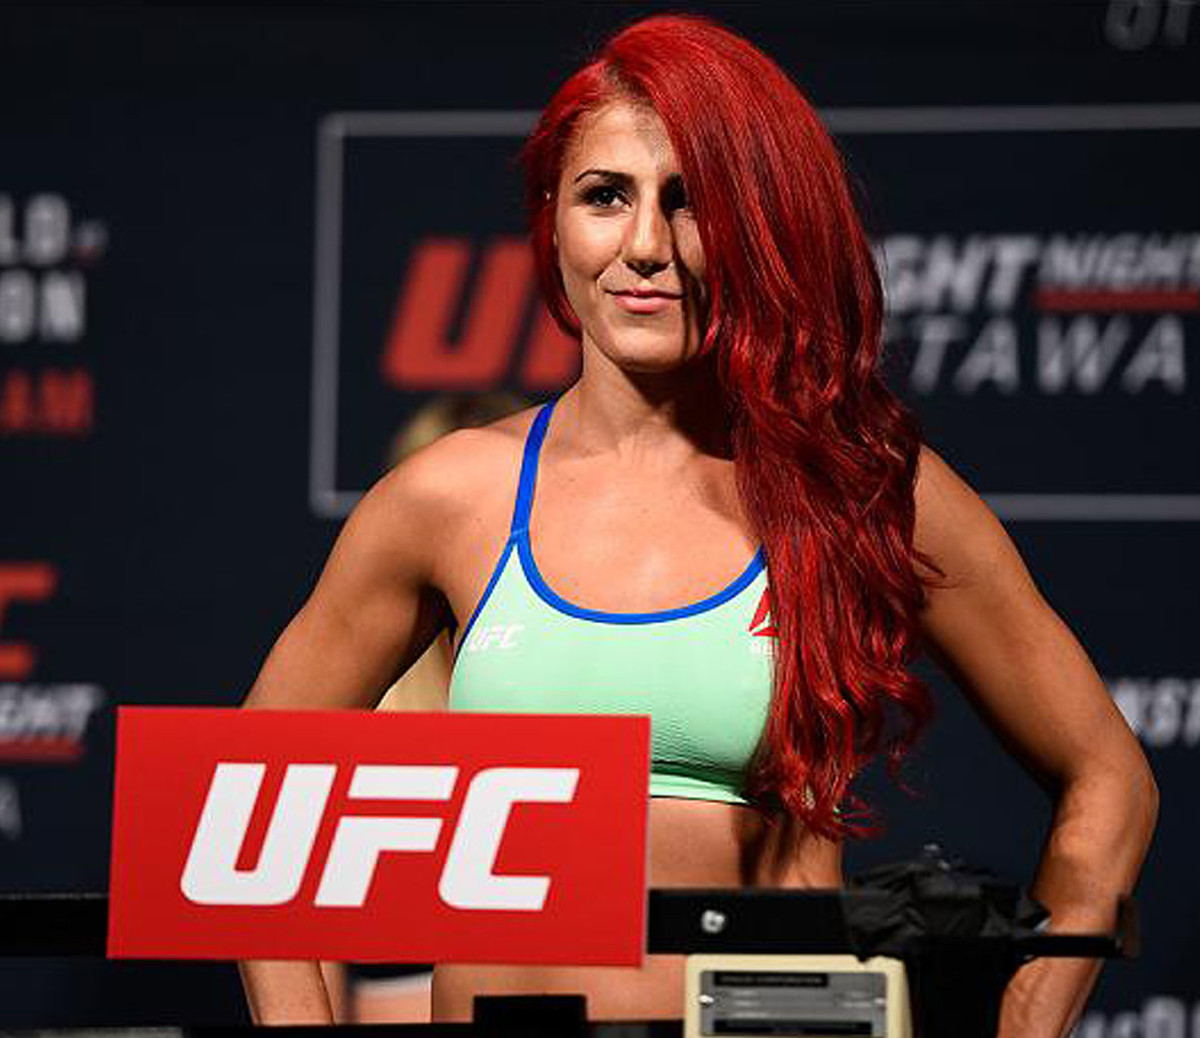 Top 5 Best Female Fighters of all time in UFC - Current Female